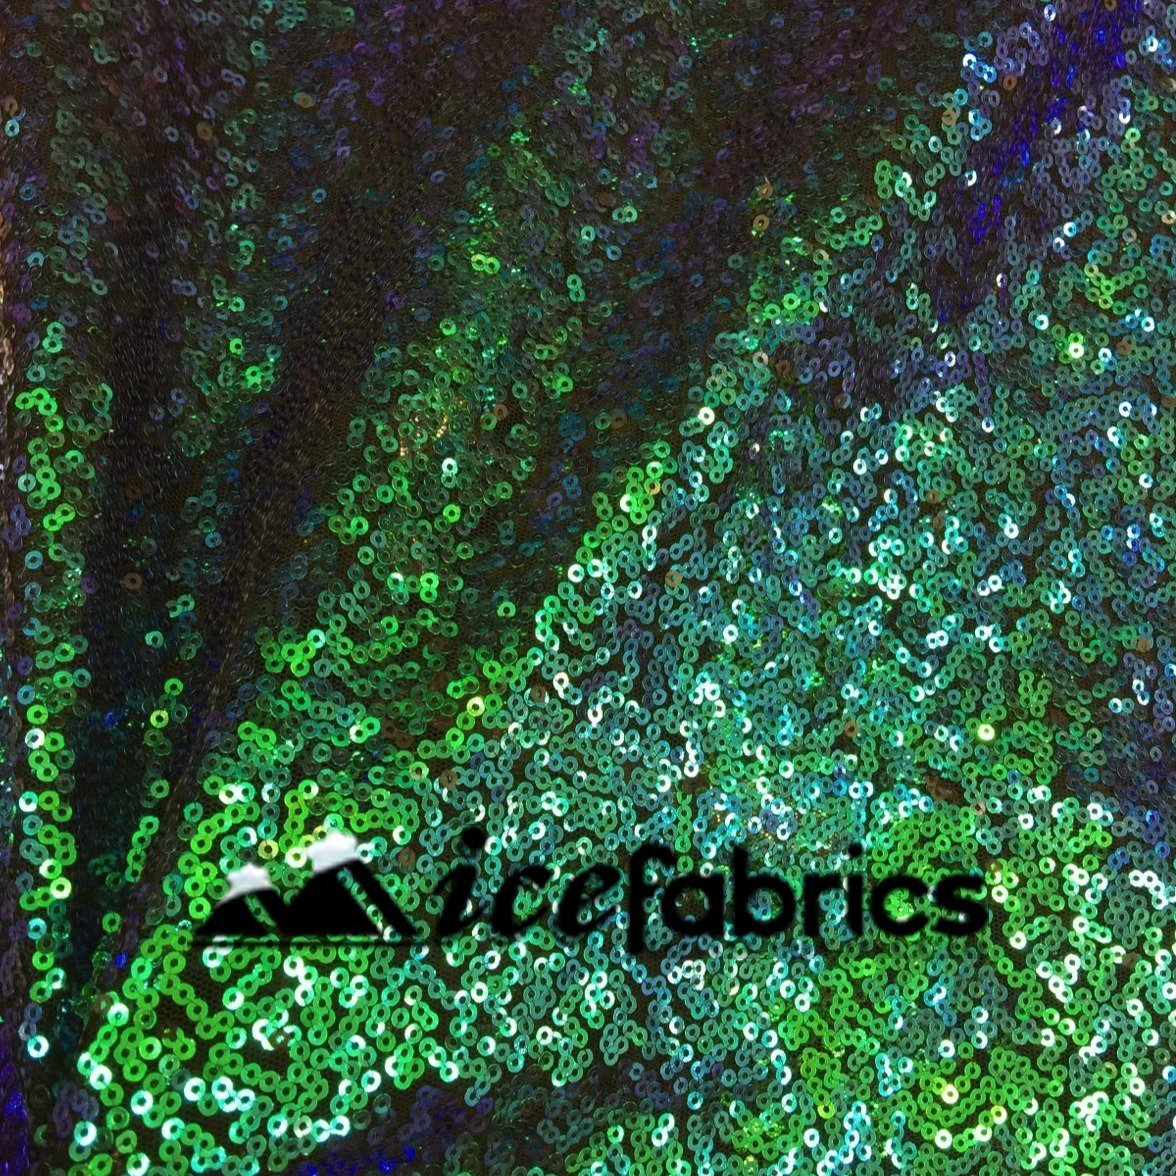 Luxurious Mesh Glitz Sequin Fabric By The Roll (20 yards) Fabric WholesaleICE FABRICSICE FABRICSMermaid IridescentBy The Roll (60" Wide)Luxurious Mesh Glitz Sequin Fabric By The Roll (20 yards) Fabric Wholesale ICE FABRICS Mermaid Iridescent